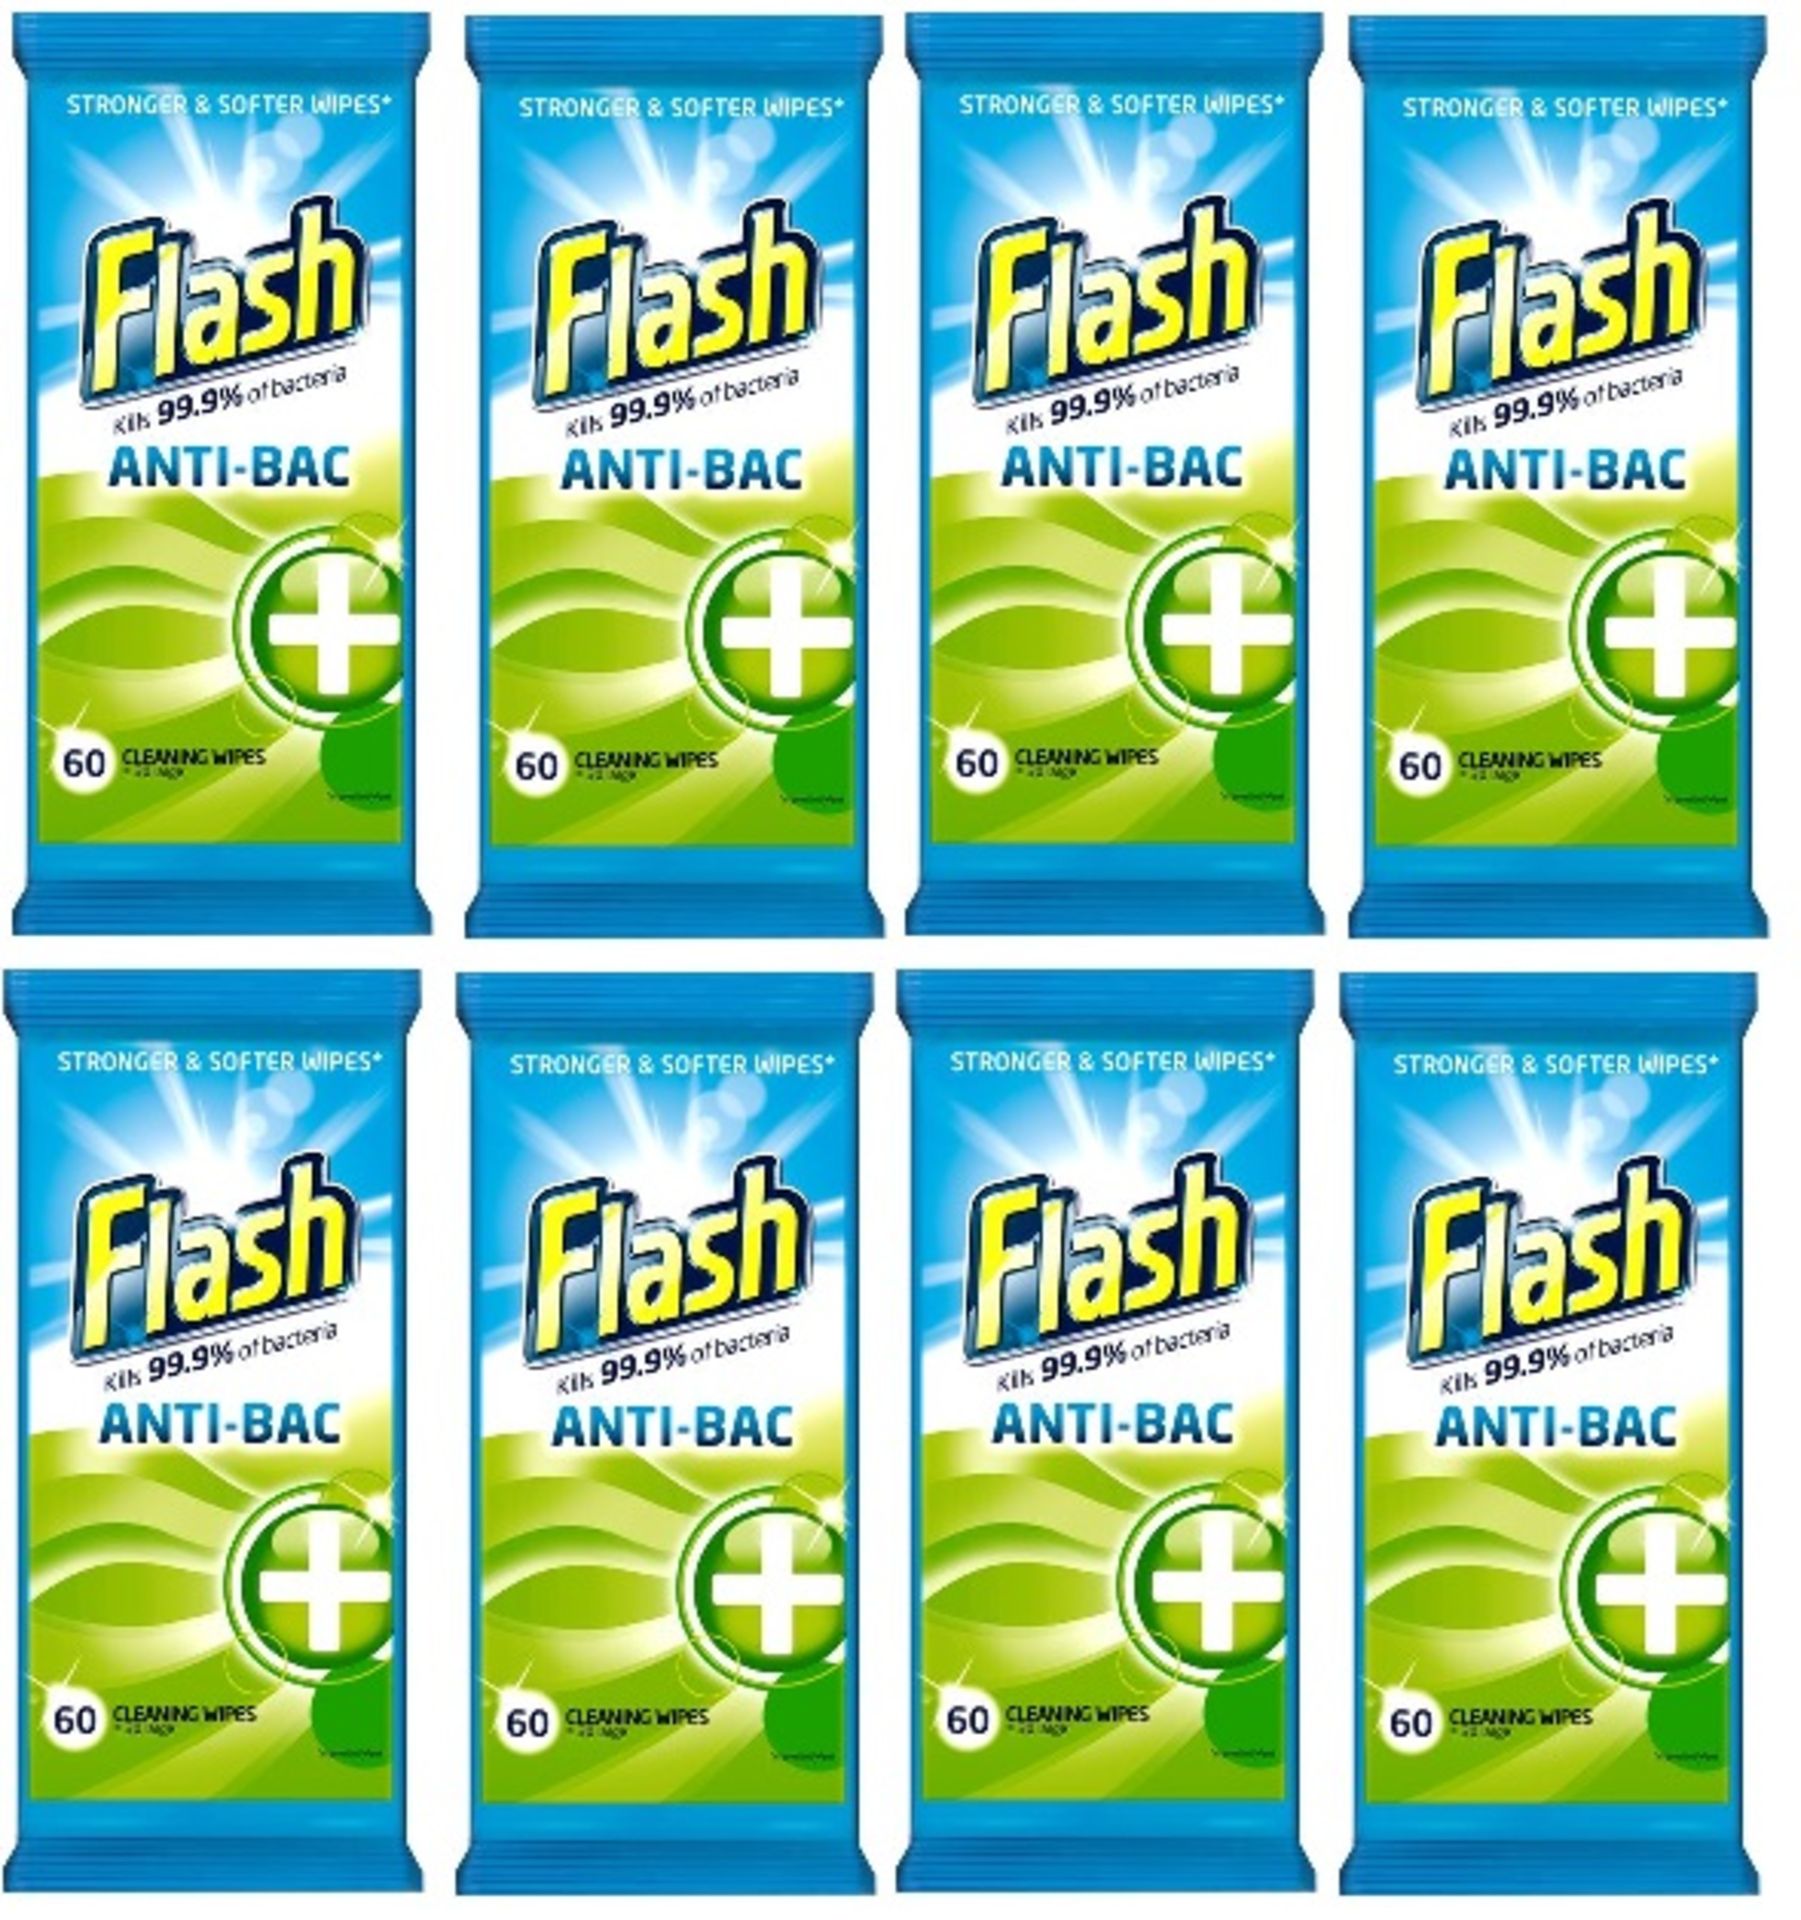 V Brand New Pack Of 8 Flash Anti-Bac Plus Wipes (x60 wipes) Sainsbury Price £16.00 Total X 2 YOUR